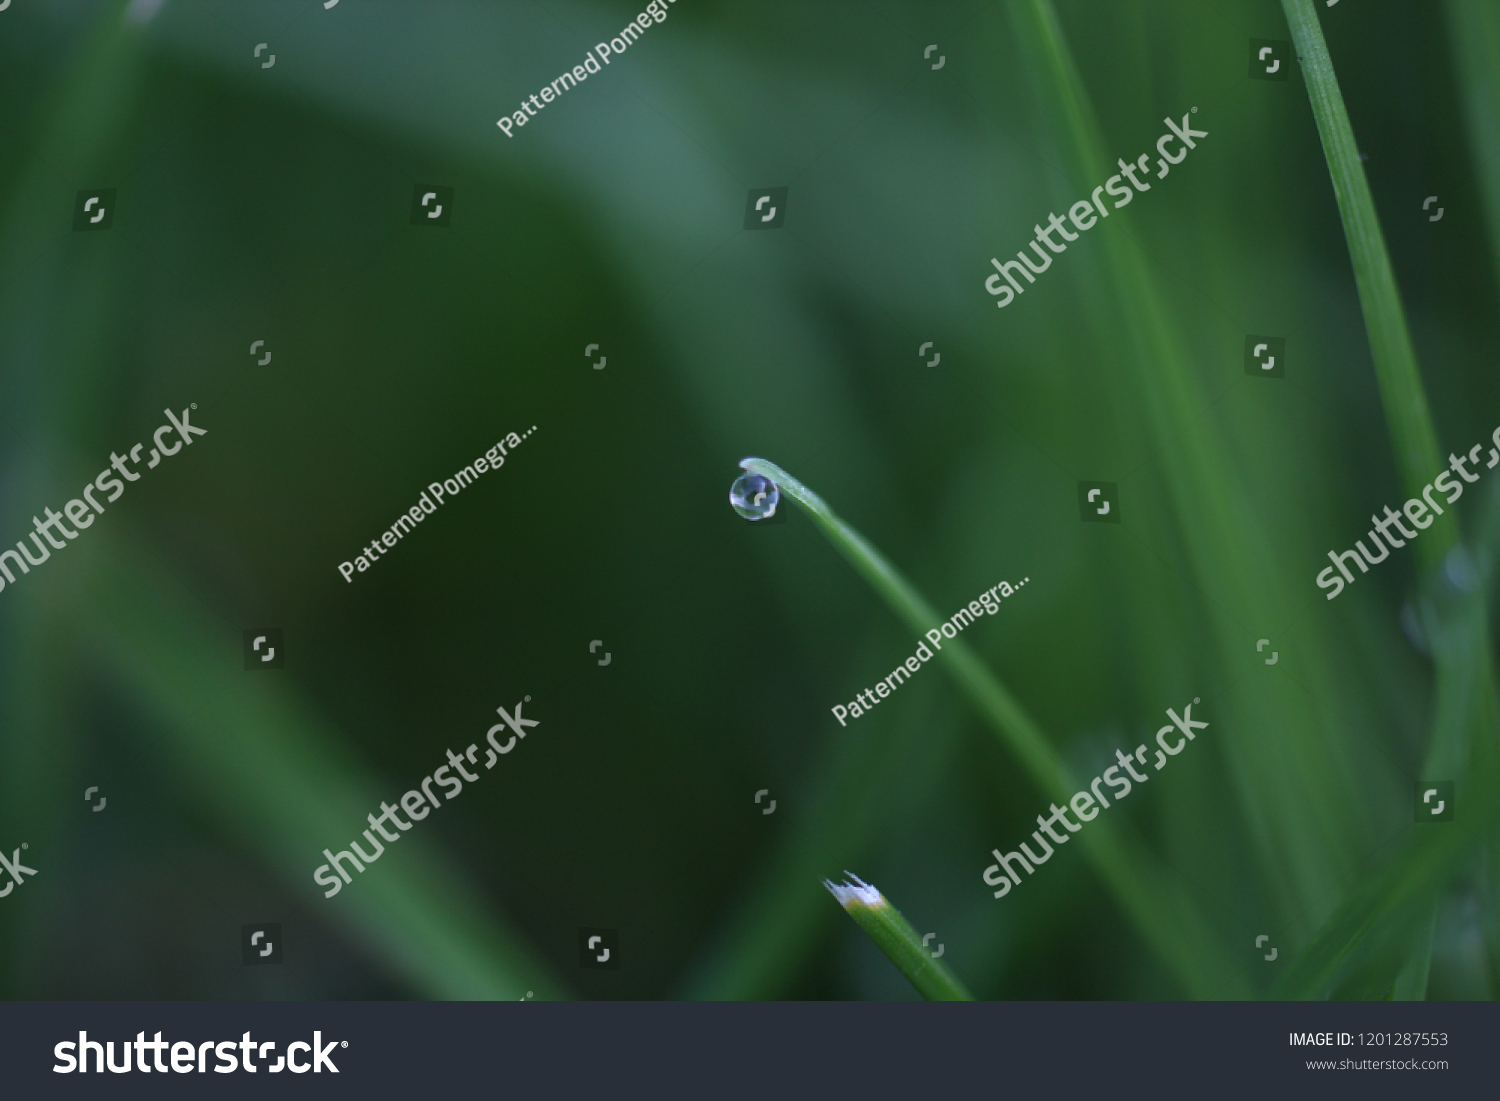 Perfect Single Droplet on a Blade of Grass, Spring Rains #1201287553